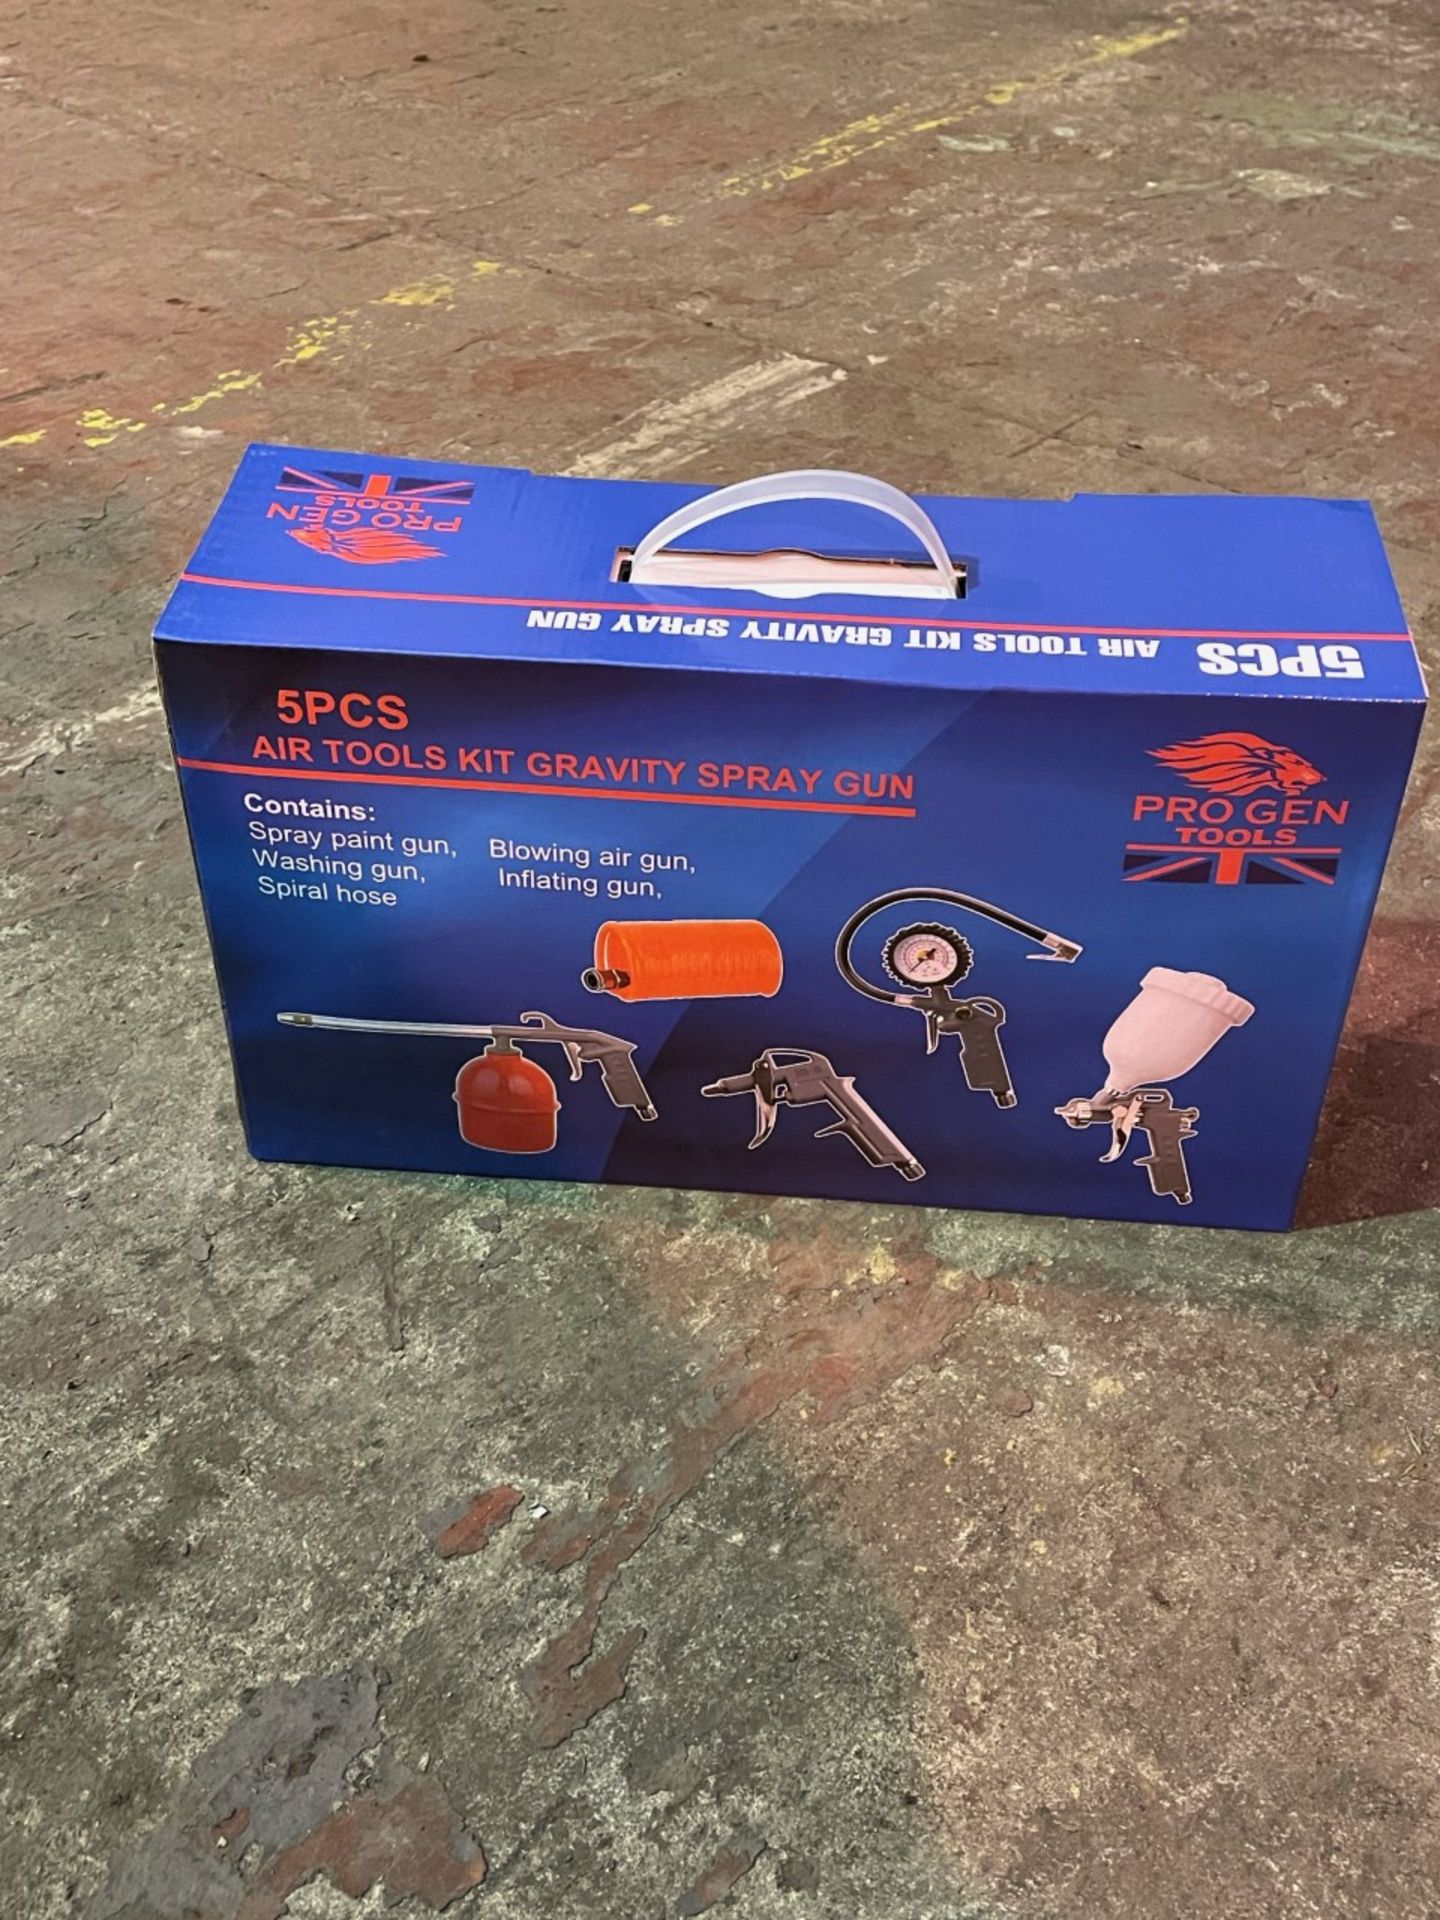 Progen 5 piece air tool kit for compressor. New in box